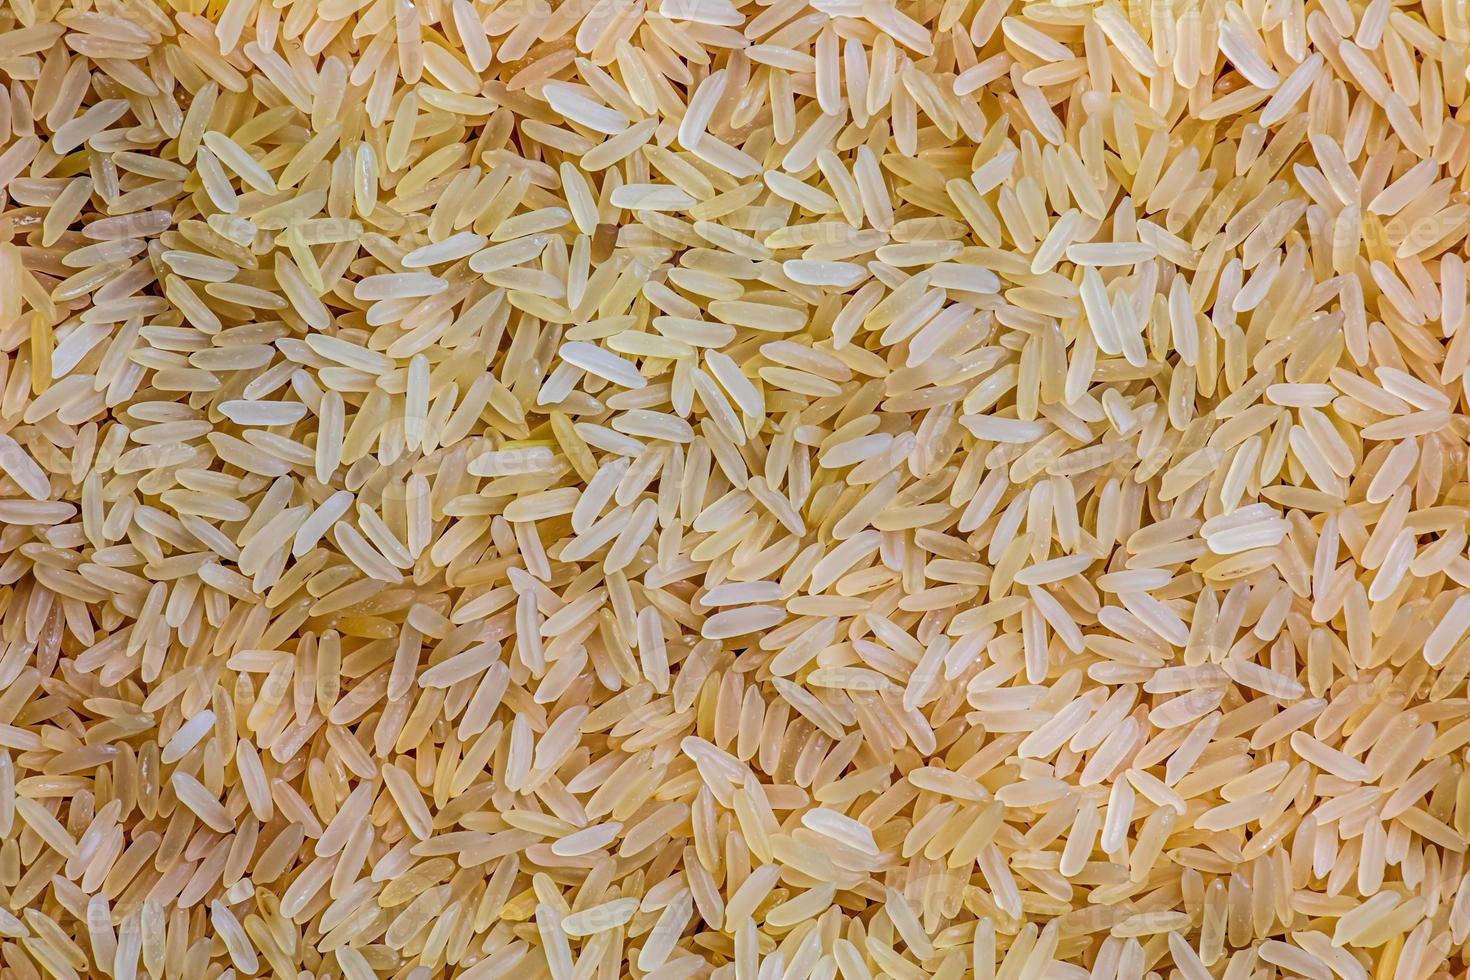 Background of long grain parboiled uncooked rice. Rice groats as background and texture. photo